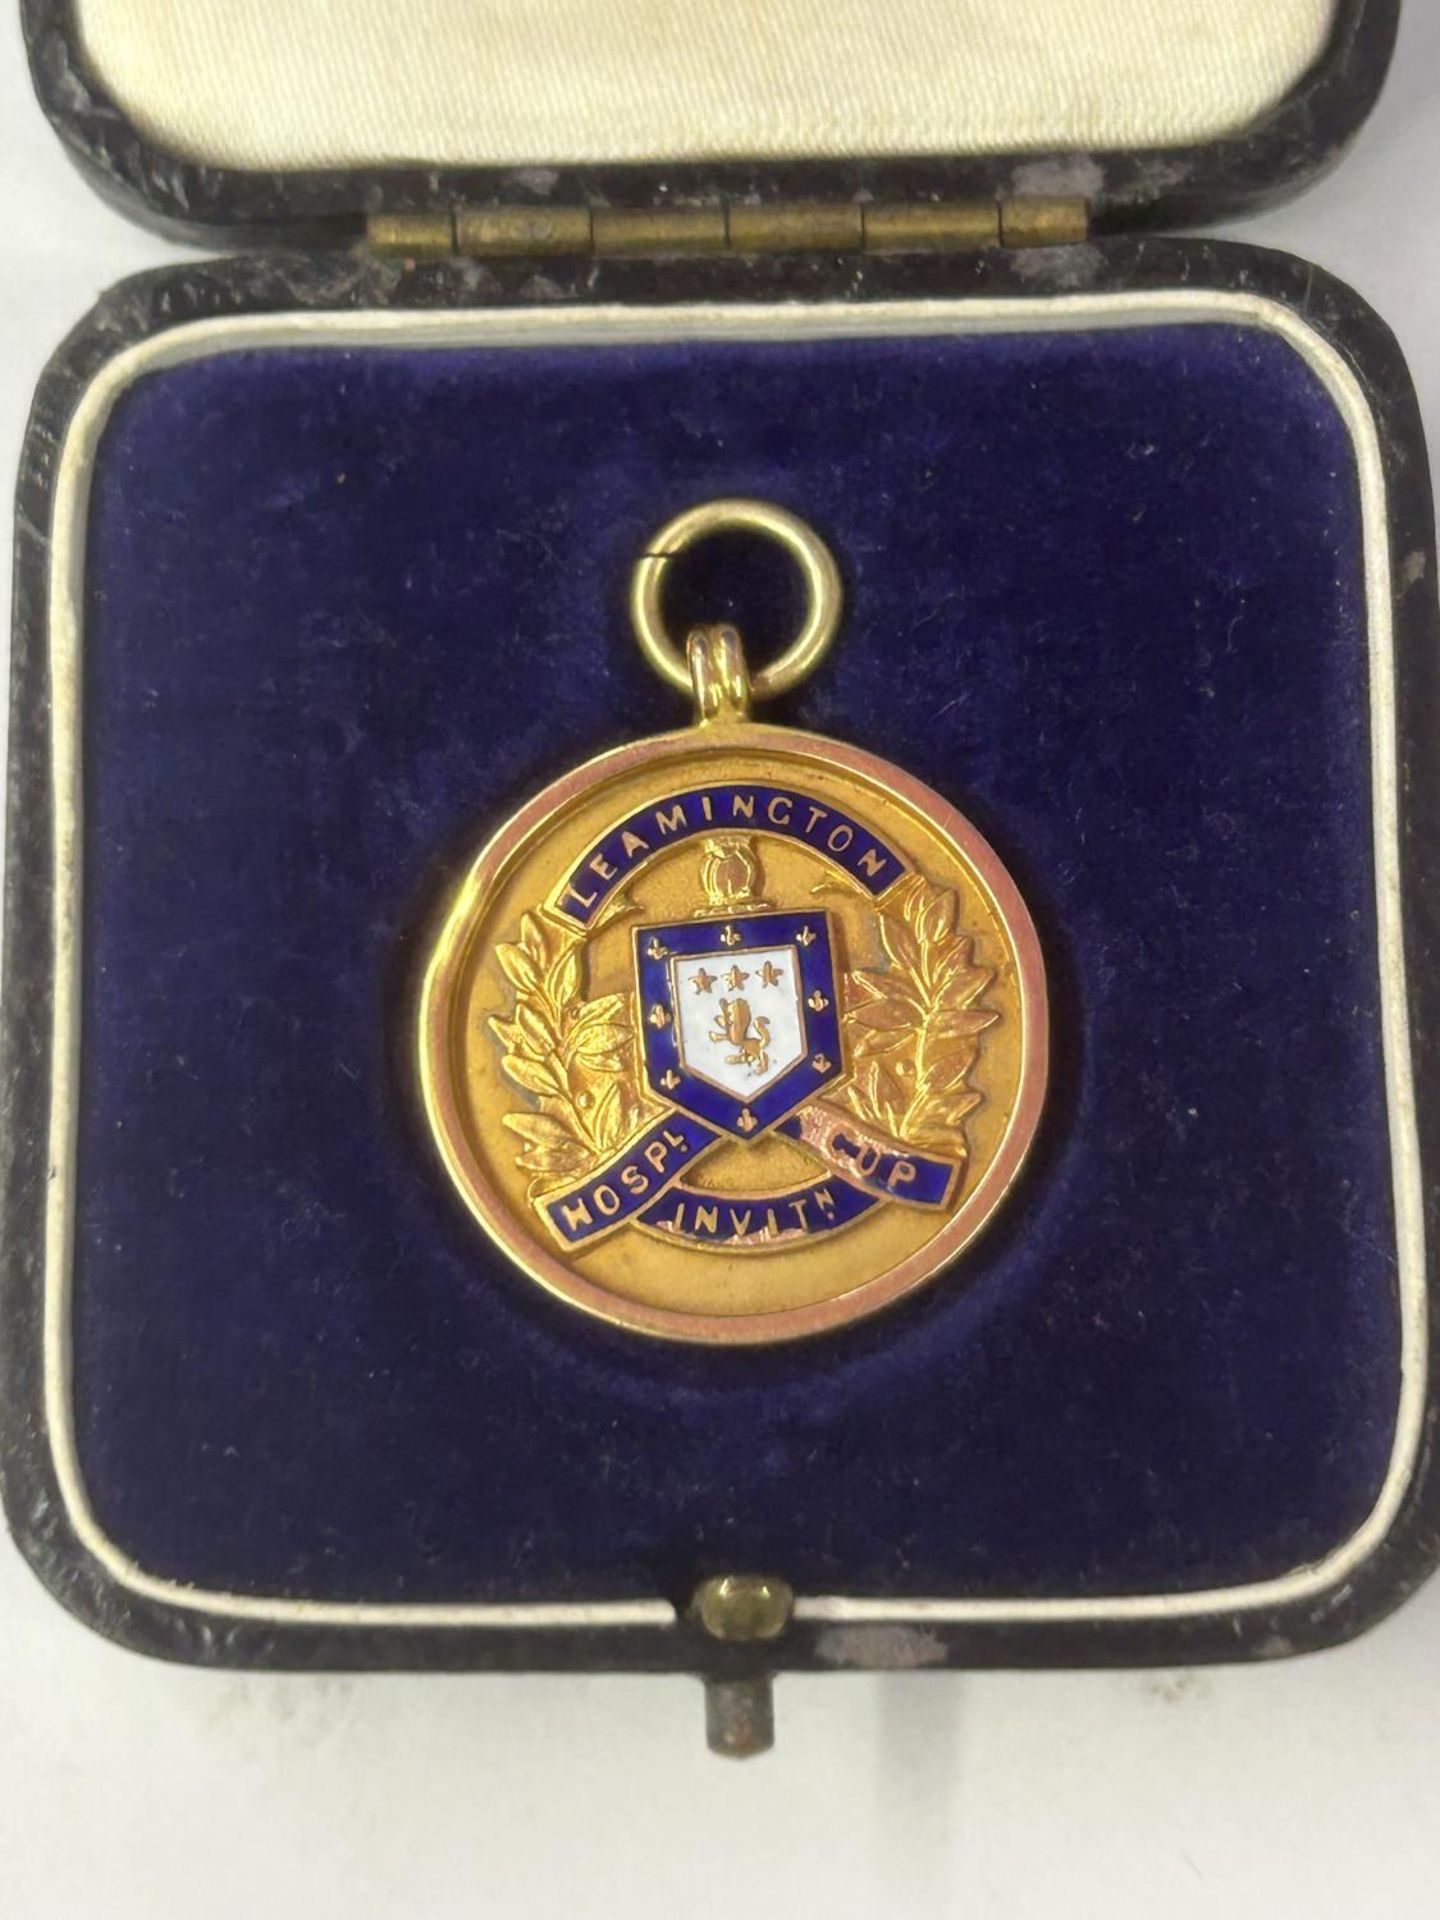 A HALLMARKED 9 CARAT GOLD & ENAMEL LEAMINGTON HOSPITALITY CUP WINNERS MEDAL 1936-1937 SEASON, BY - Image 2 of 5